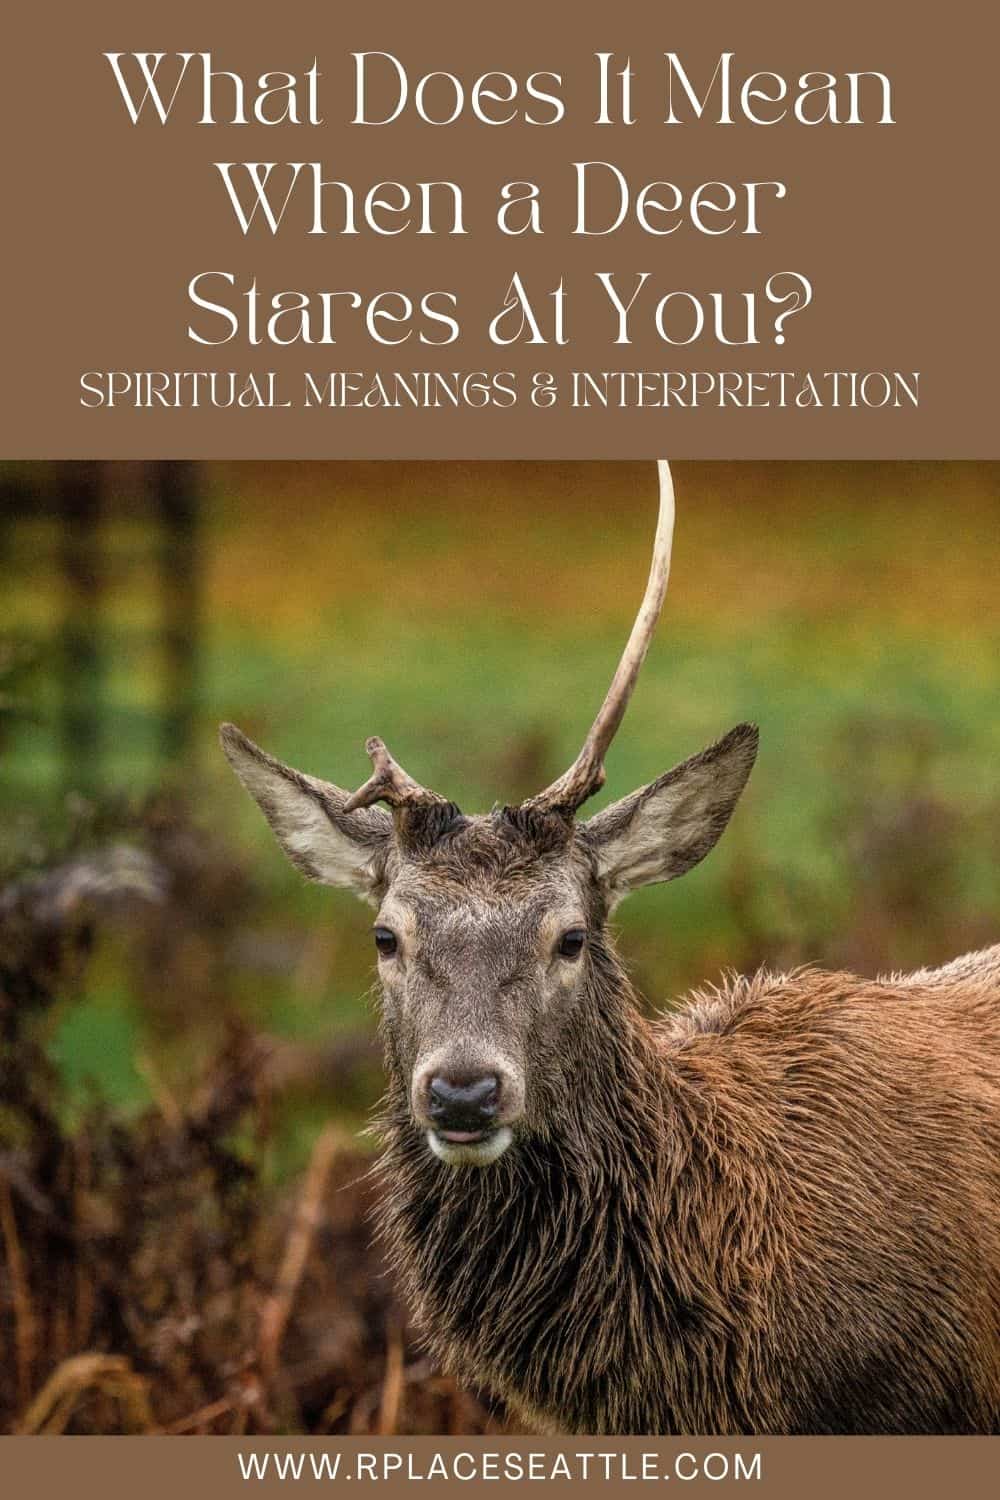 What Does It Mean When a Deer Stares At You (Spiritual Meanings & Interpretation)